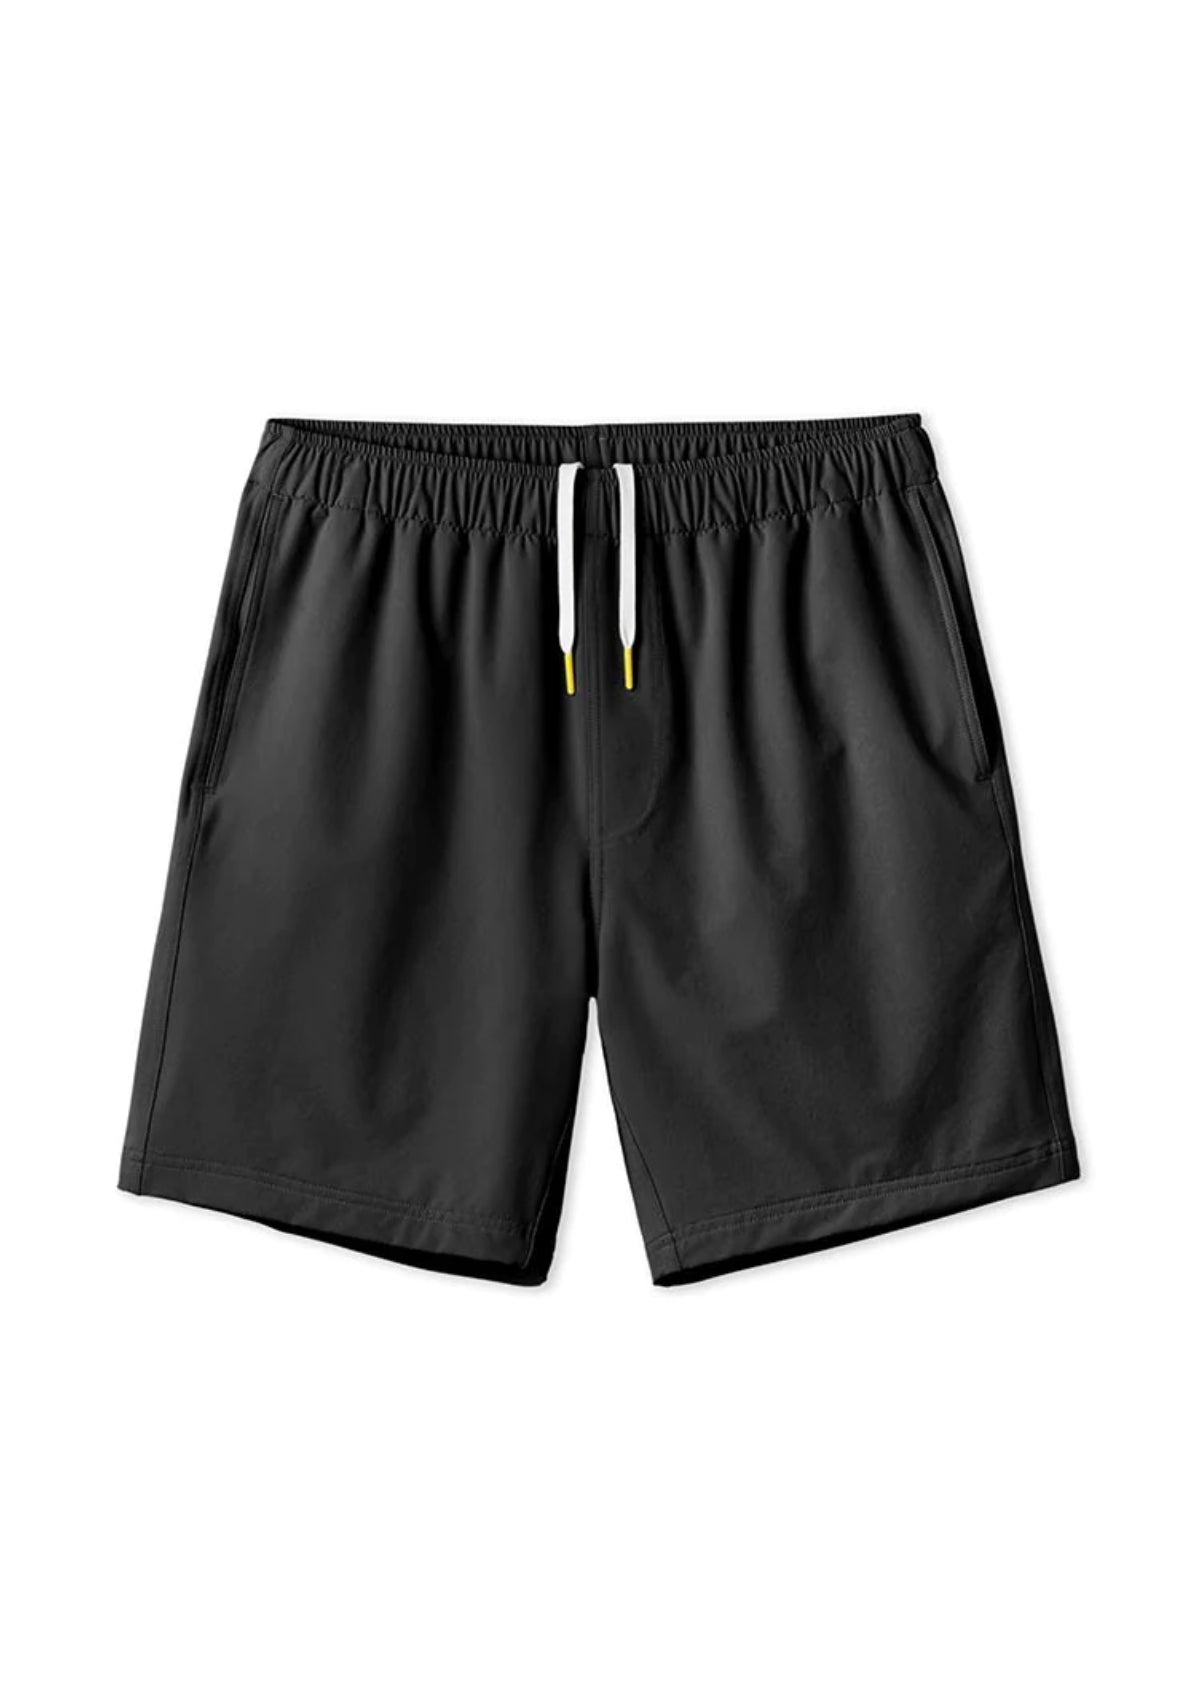 All Over Shorts Lined - Black